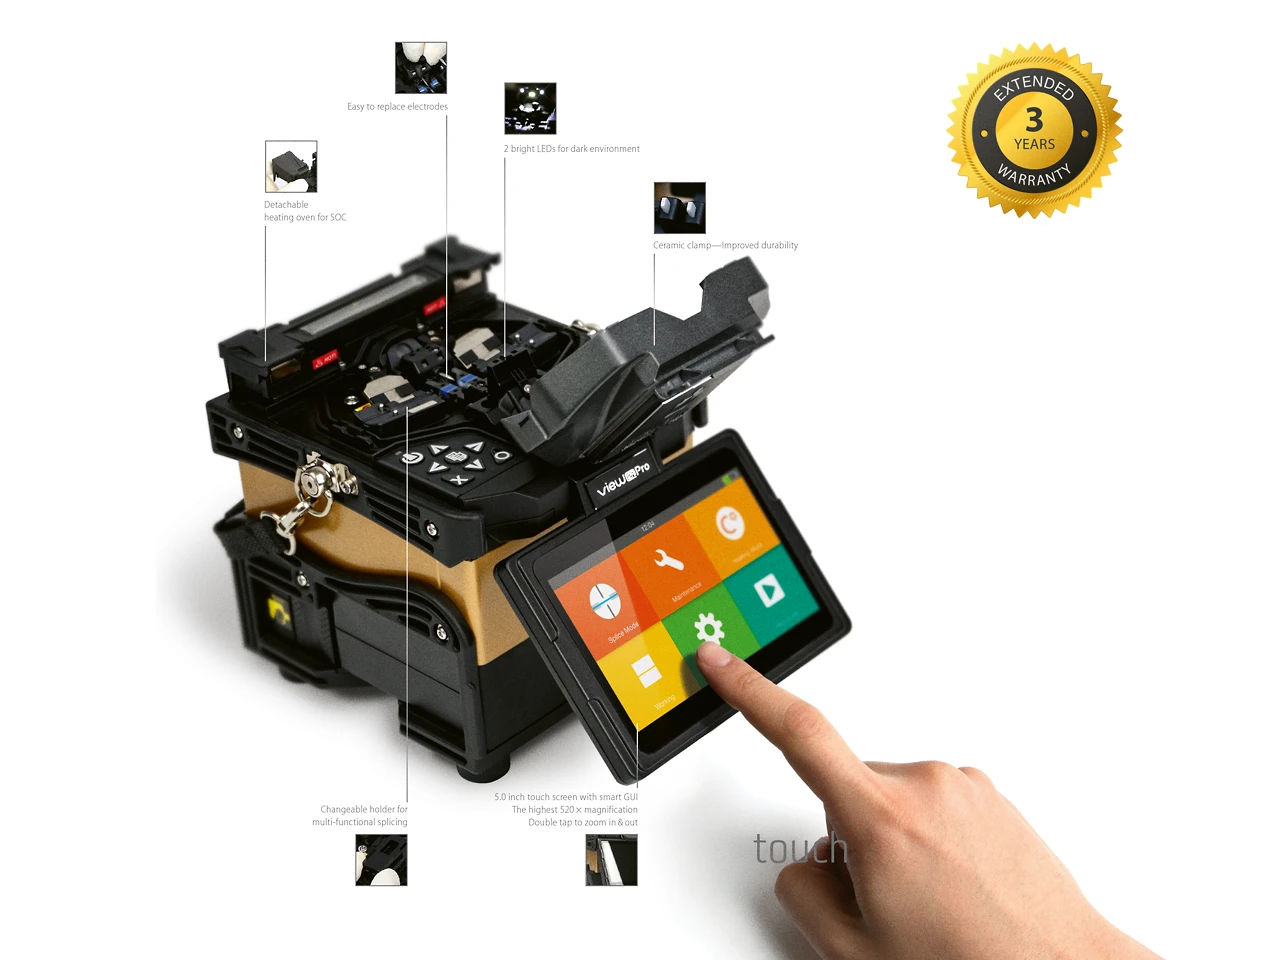 View 8 Pro splicer: Device features overview